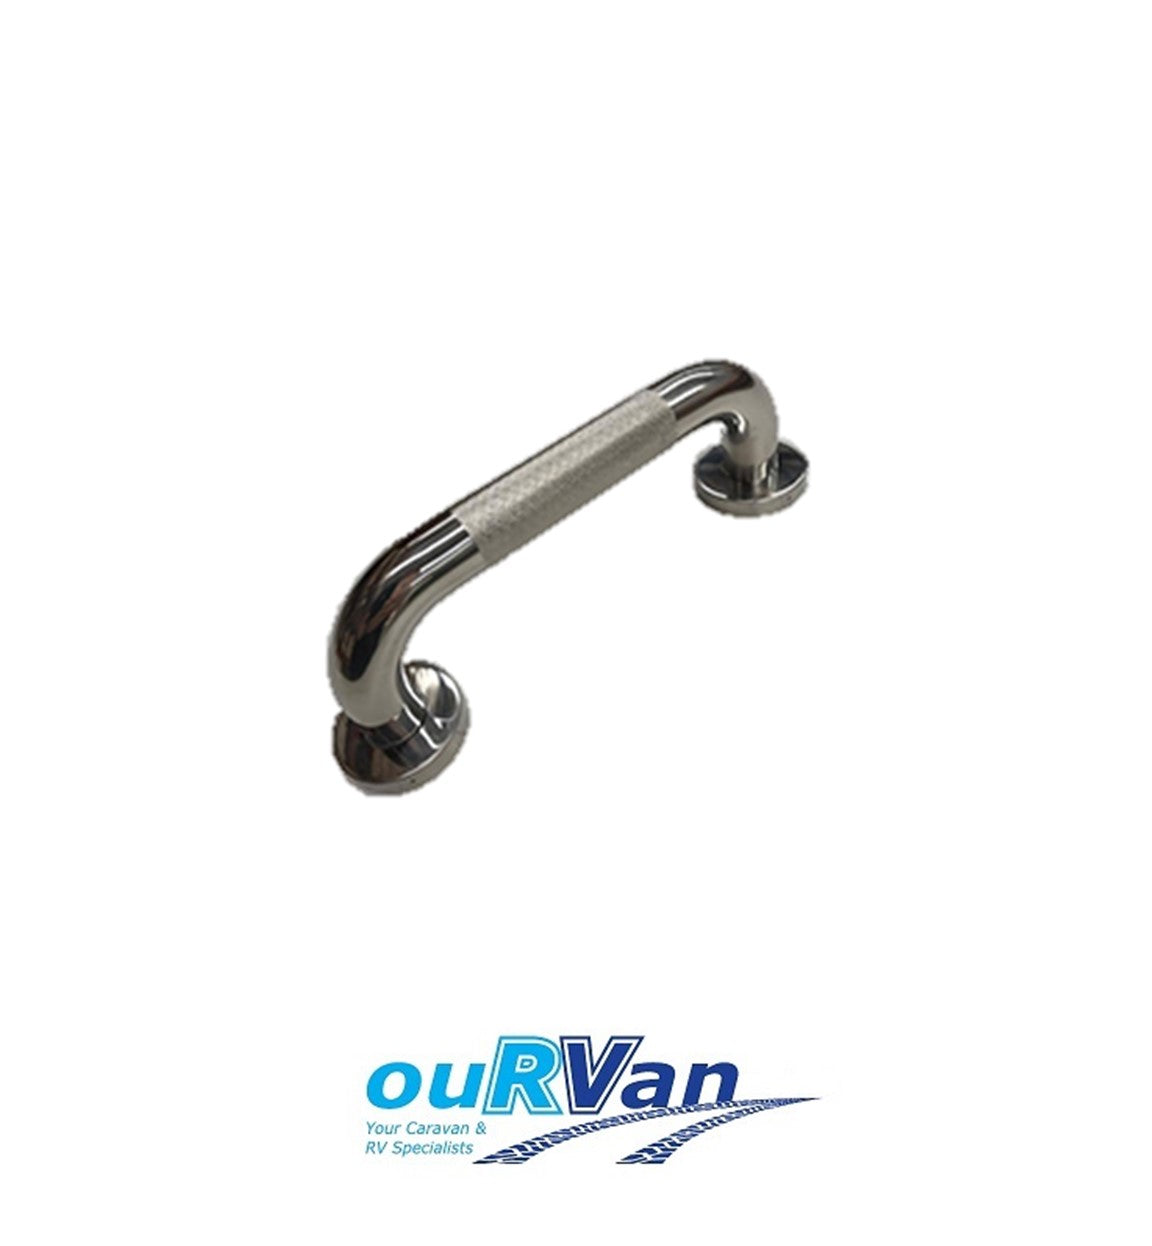 200mm Knurled Stainless Steel Grab Bar – Gb302g